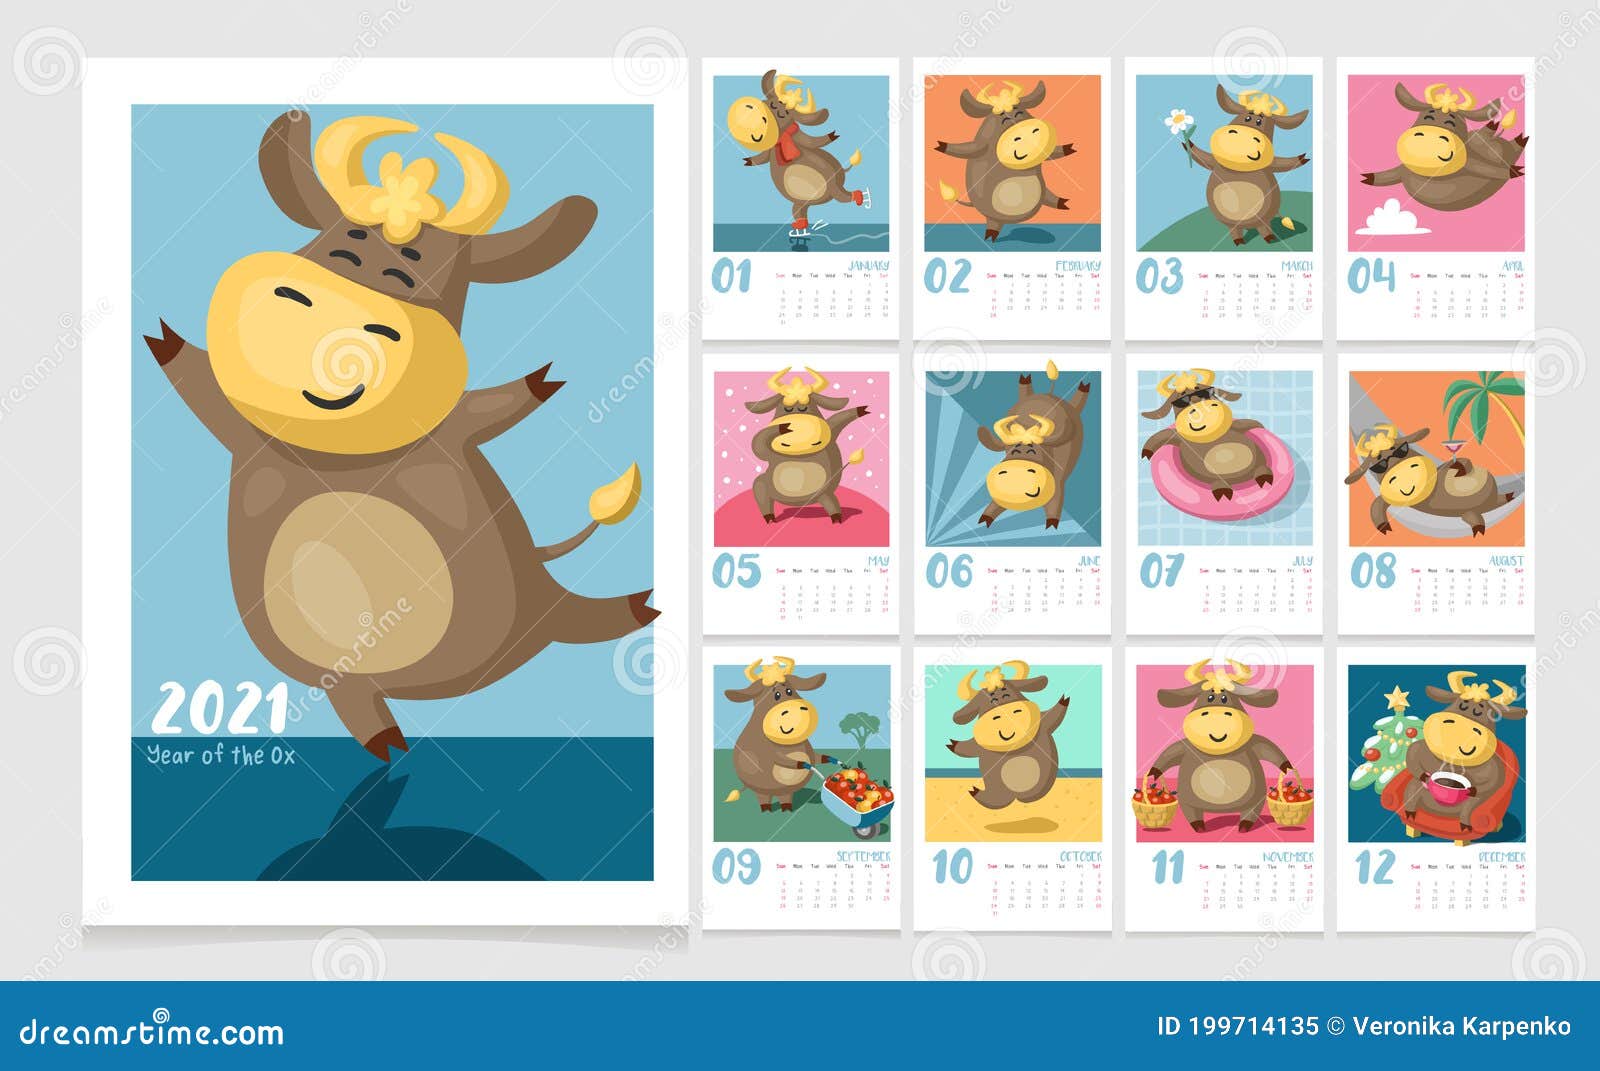 colorful calendar for kids for 2021 year of the ox. 12 monthly pages.